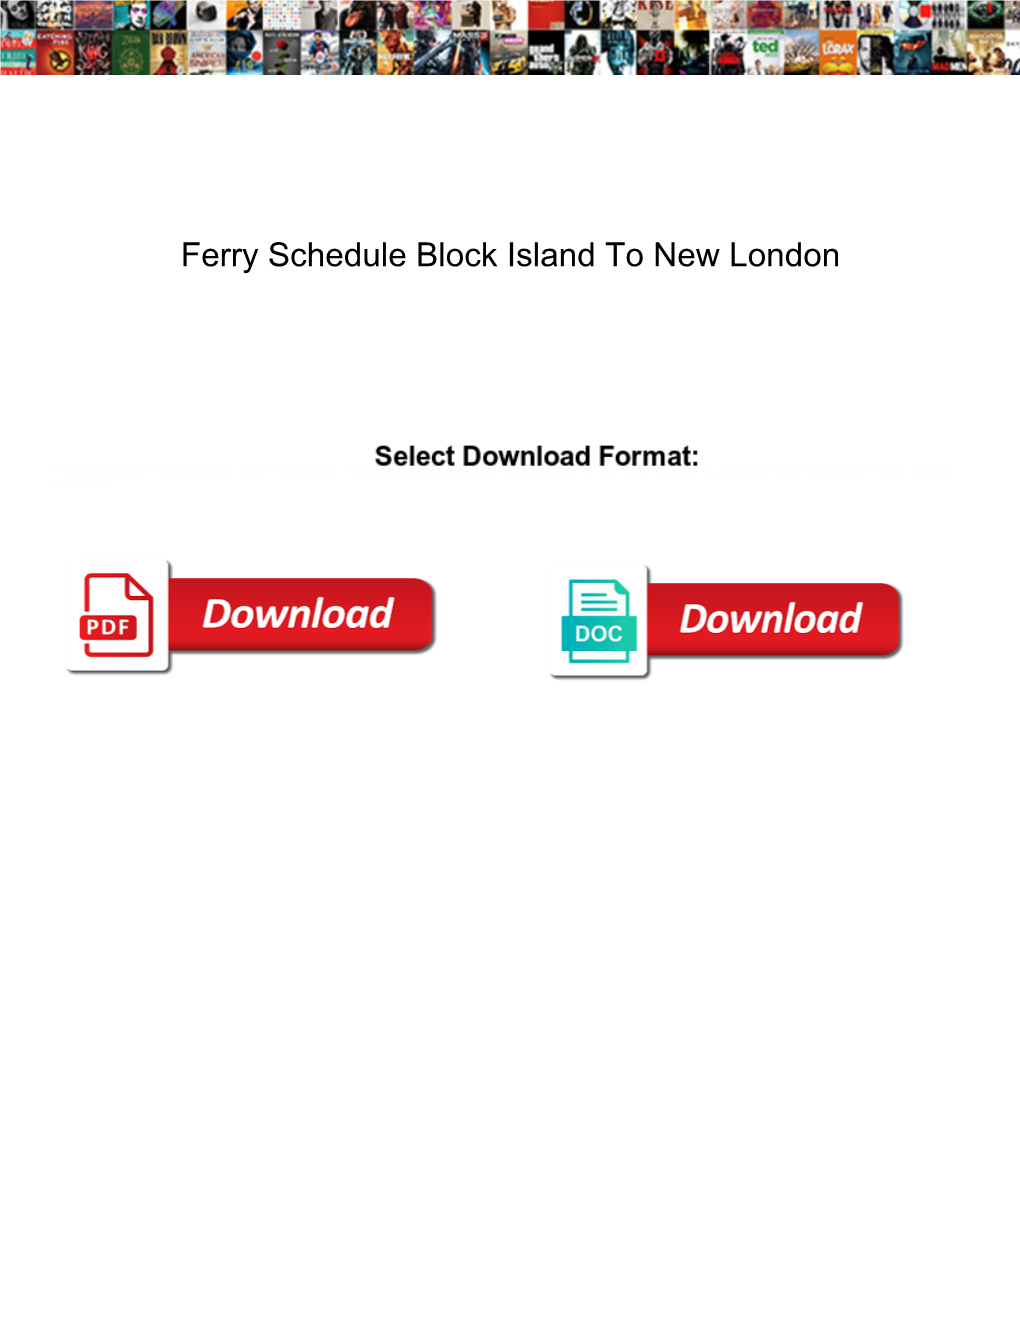 Ferry Schedule Block Island to New London